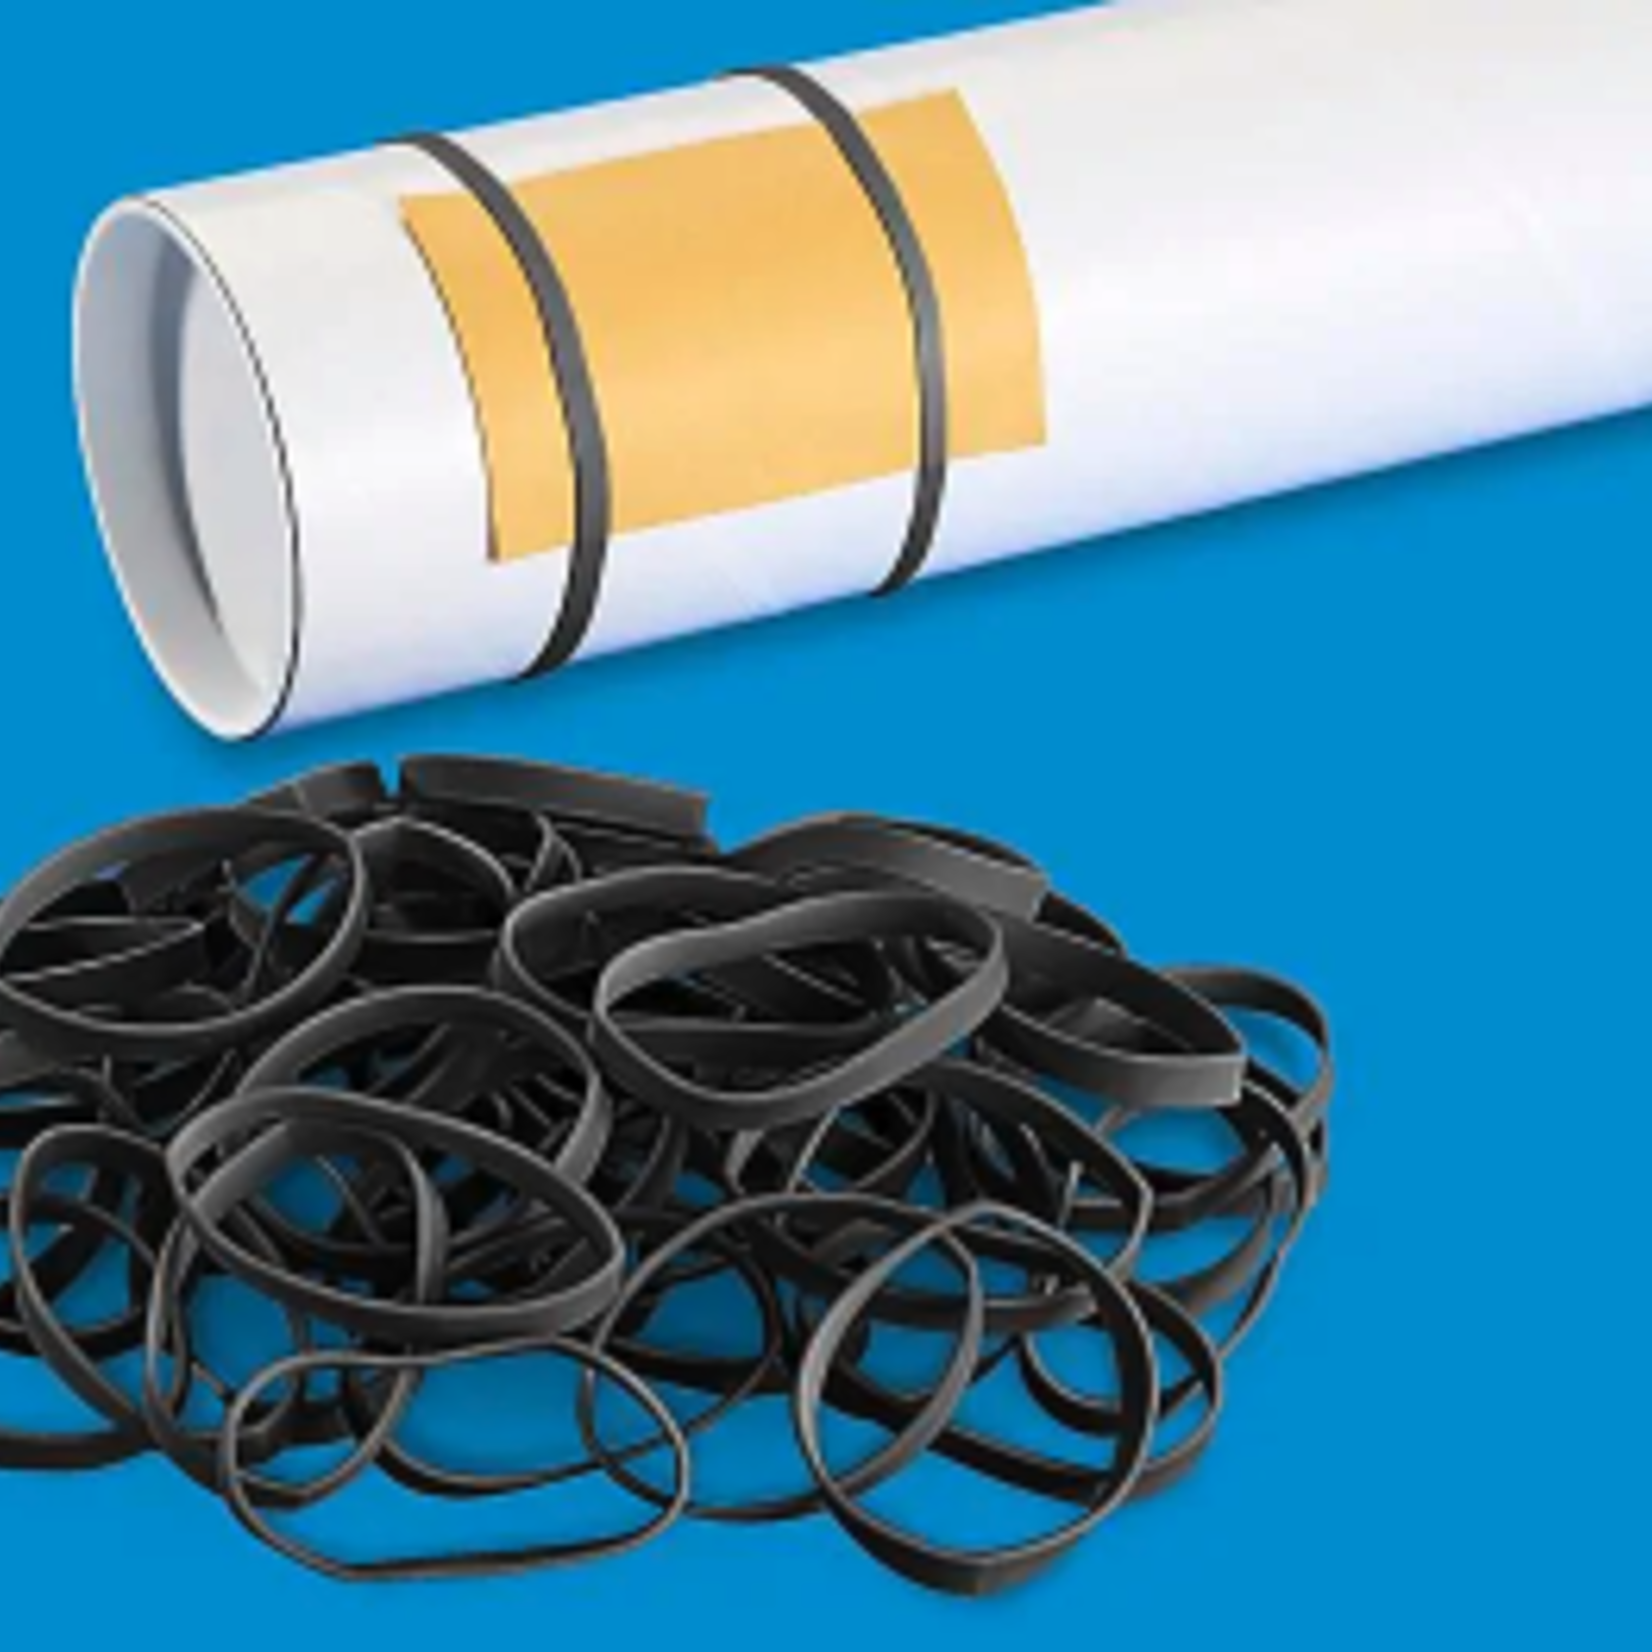 Band-it Rubber Bands 1/4lb